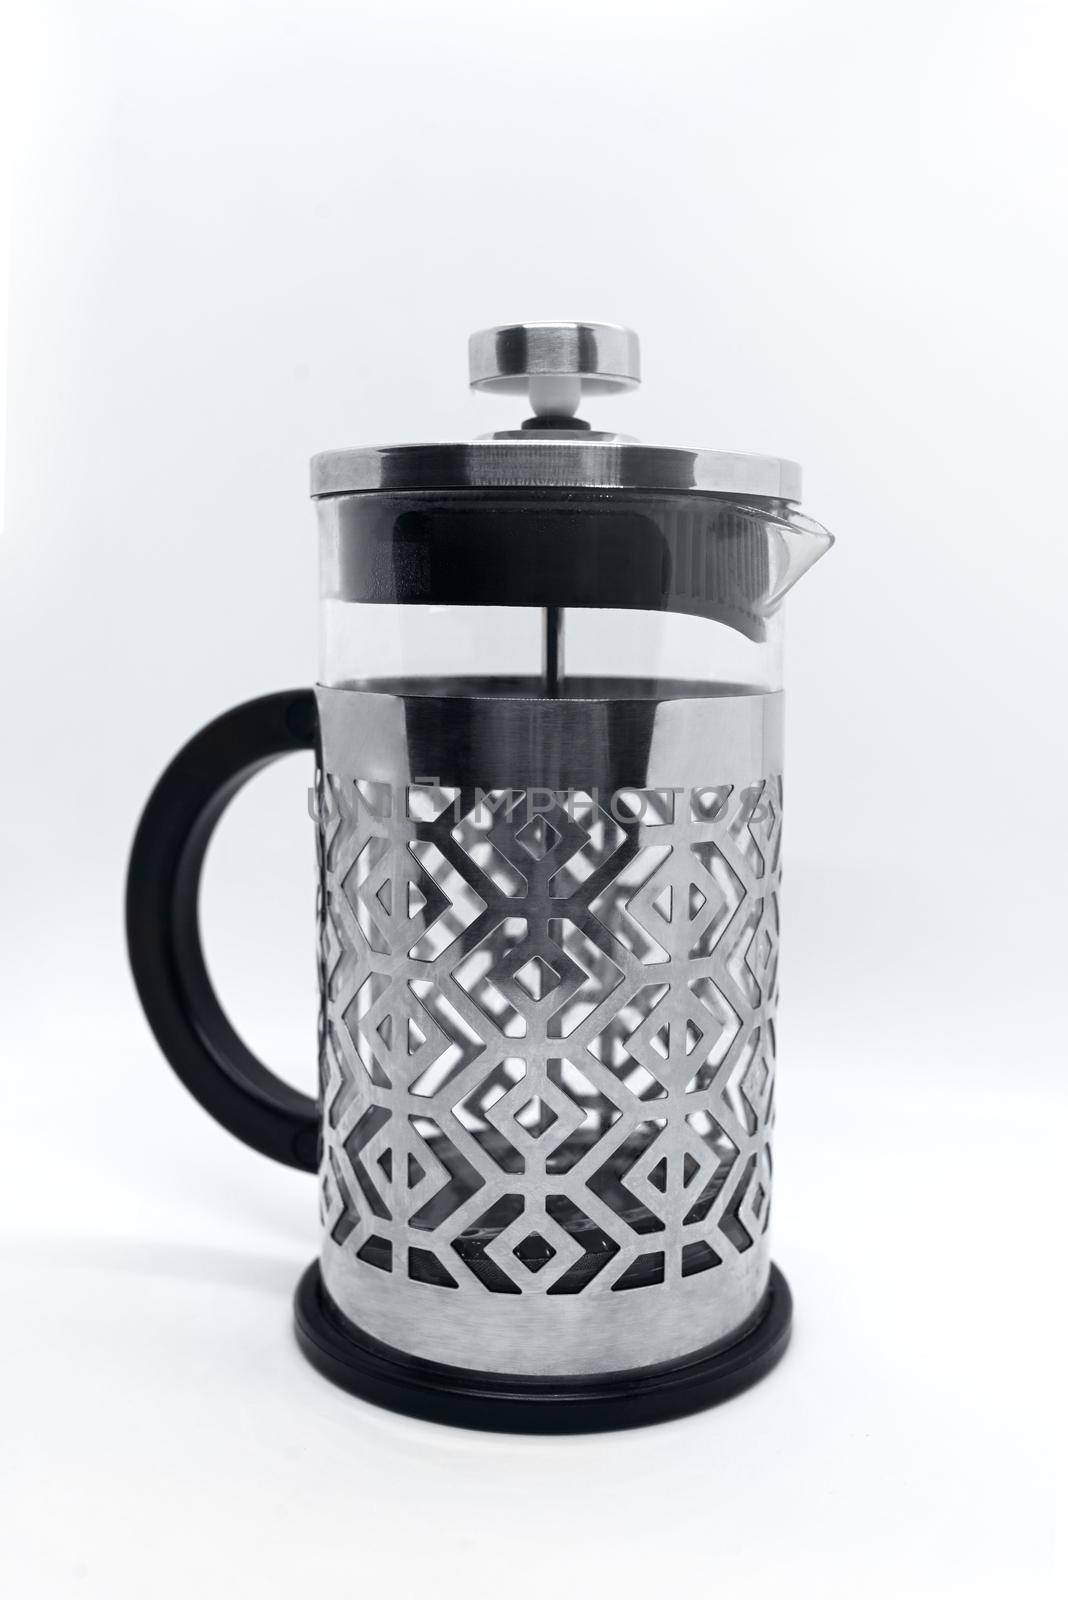 Clear Press Coffee Maker Isolated on White. French Press in Stainless Steel with Removable Borosilicate Glass Flask for Hot Cold Drinks. Modern Small Domestic Kitchenware. Vessel for Filtering Blend by Nickstock